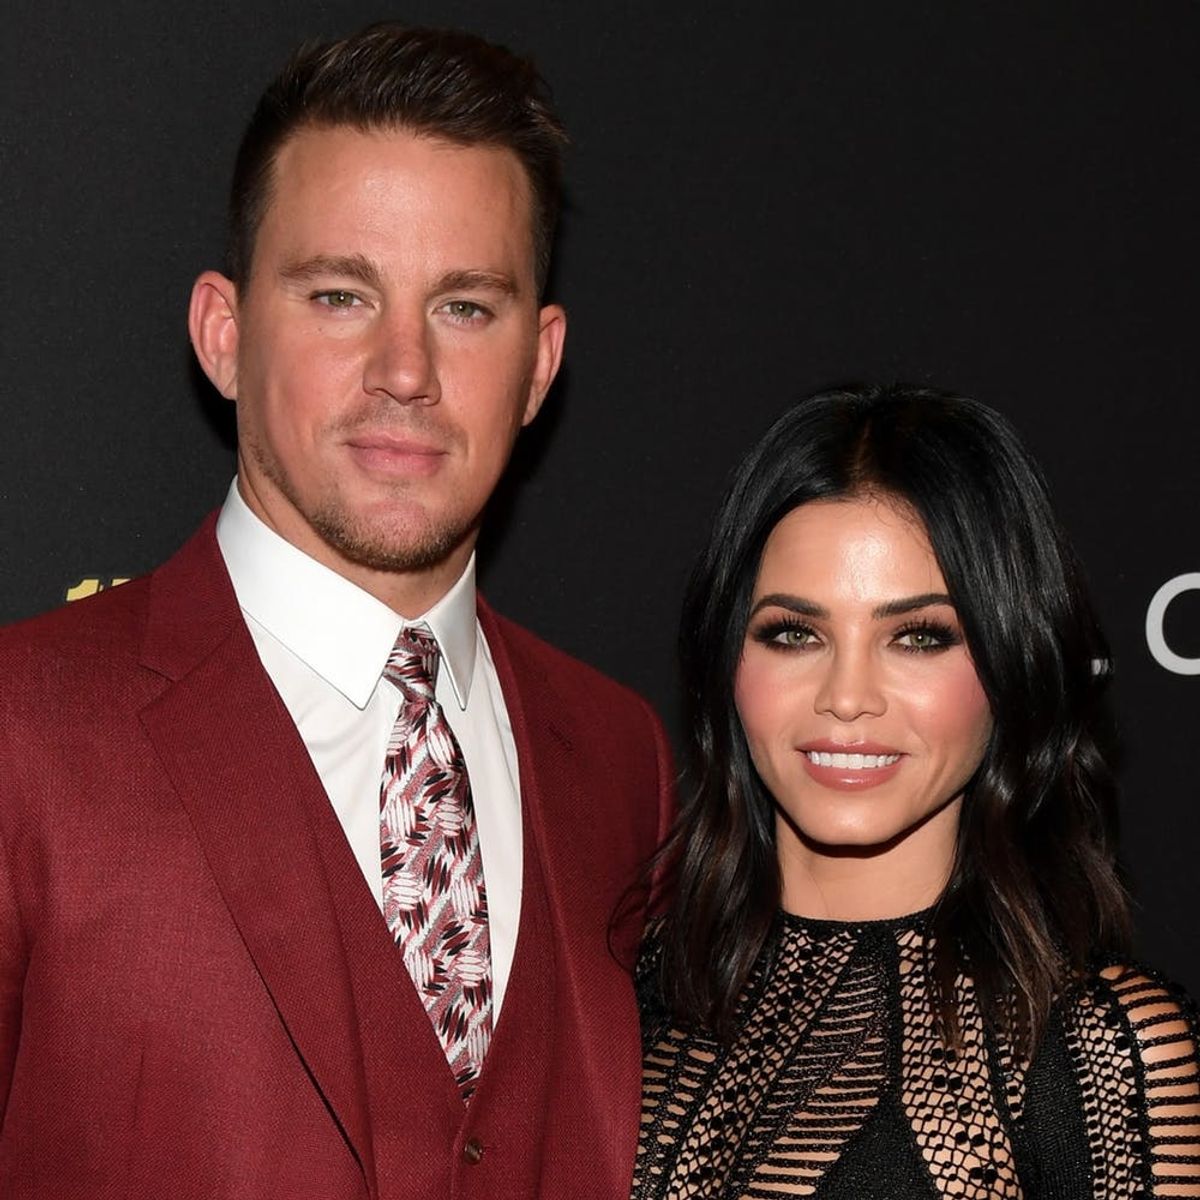 Jenna Dewan Tatum and Channing Tatum’s ‘Step Up’ Audition Video Will Make You Believe in Love at First Dance